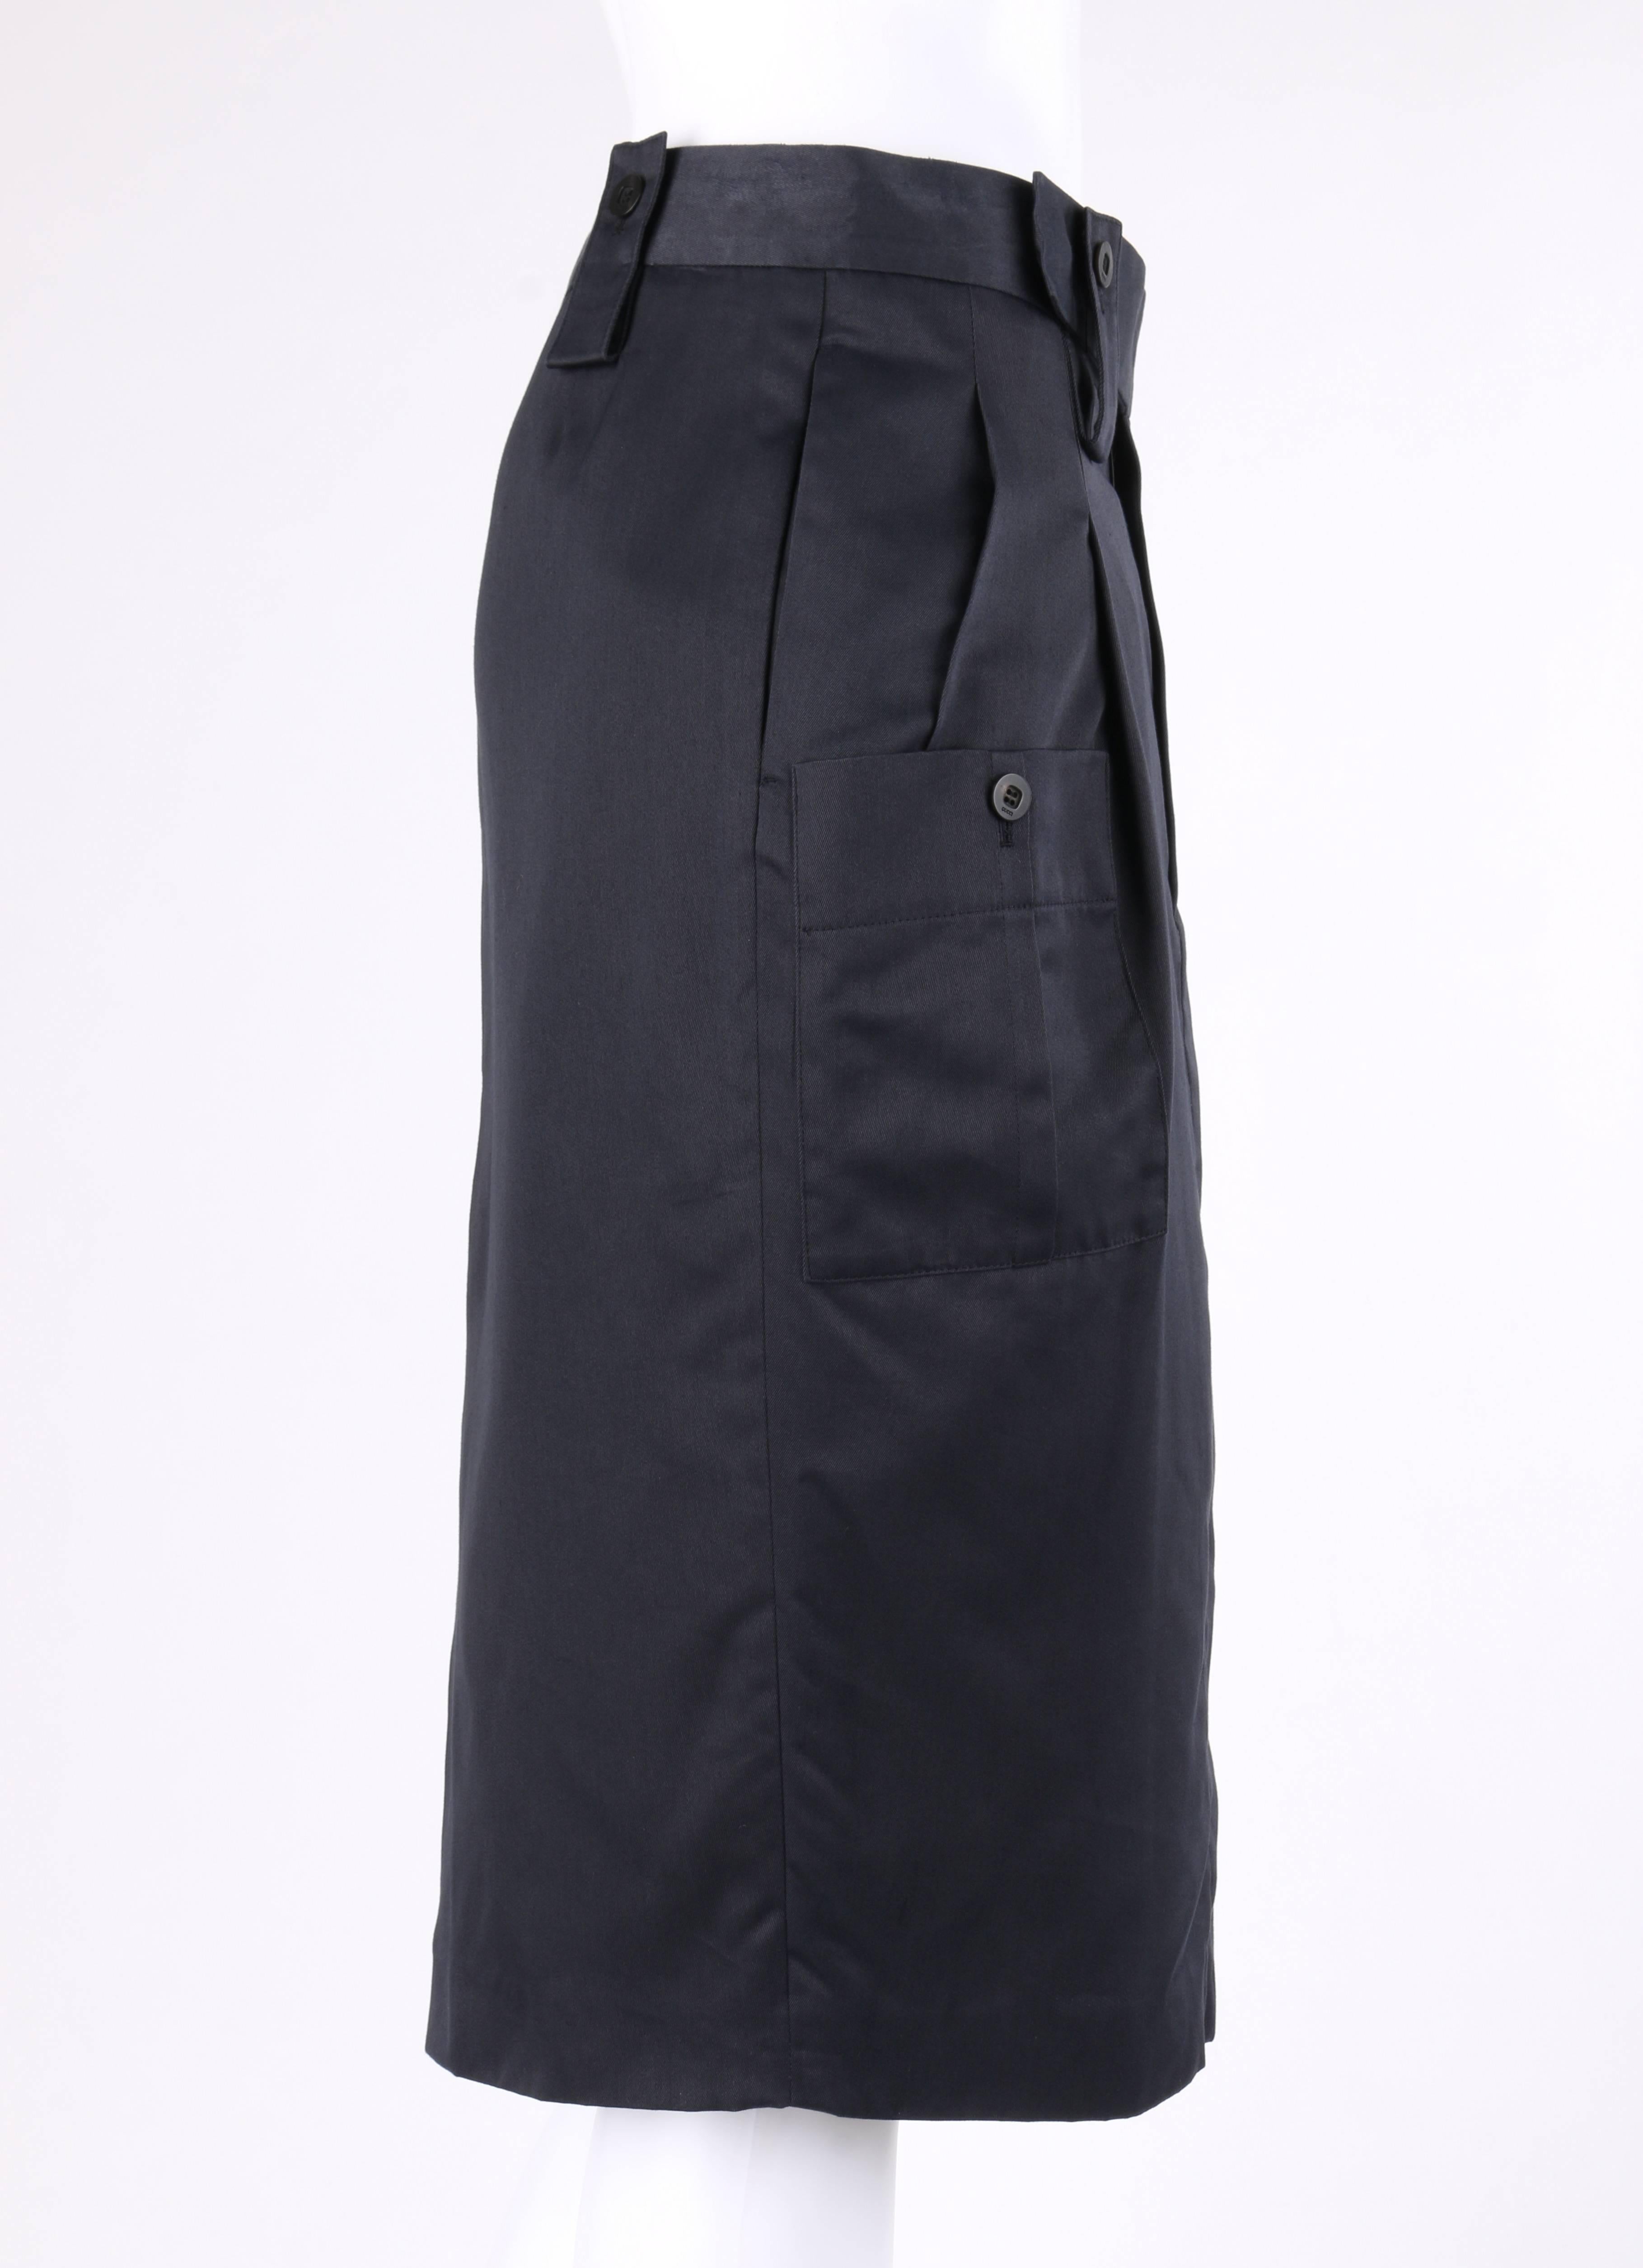 Gucci Spring / Summer 2001 navy blue silk twill cargo pocket pencil skirt; new with tags. Runway look #31 designed by Tom Ford. Banded waistline. Four belt loops with single button closures. Center front zip fly with two hook and bar and single